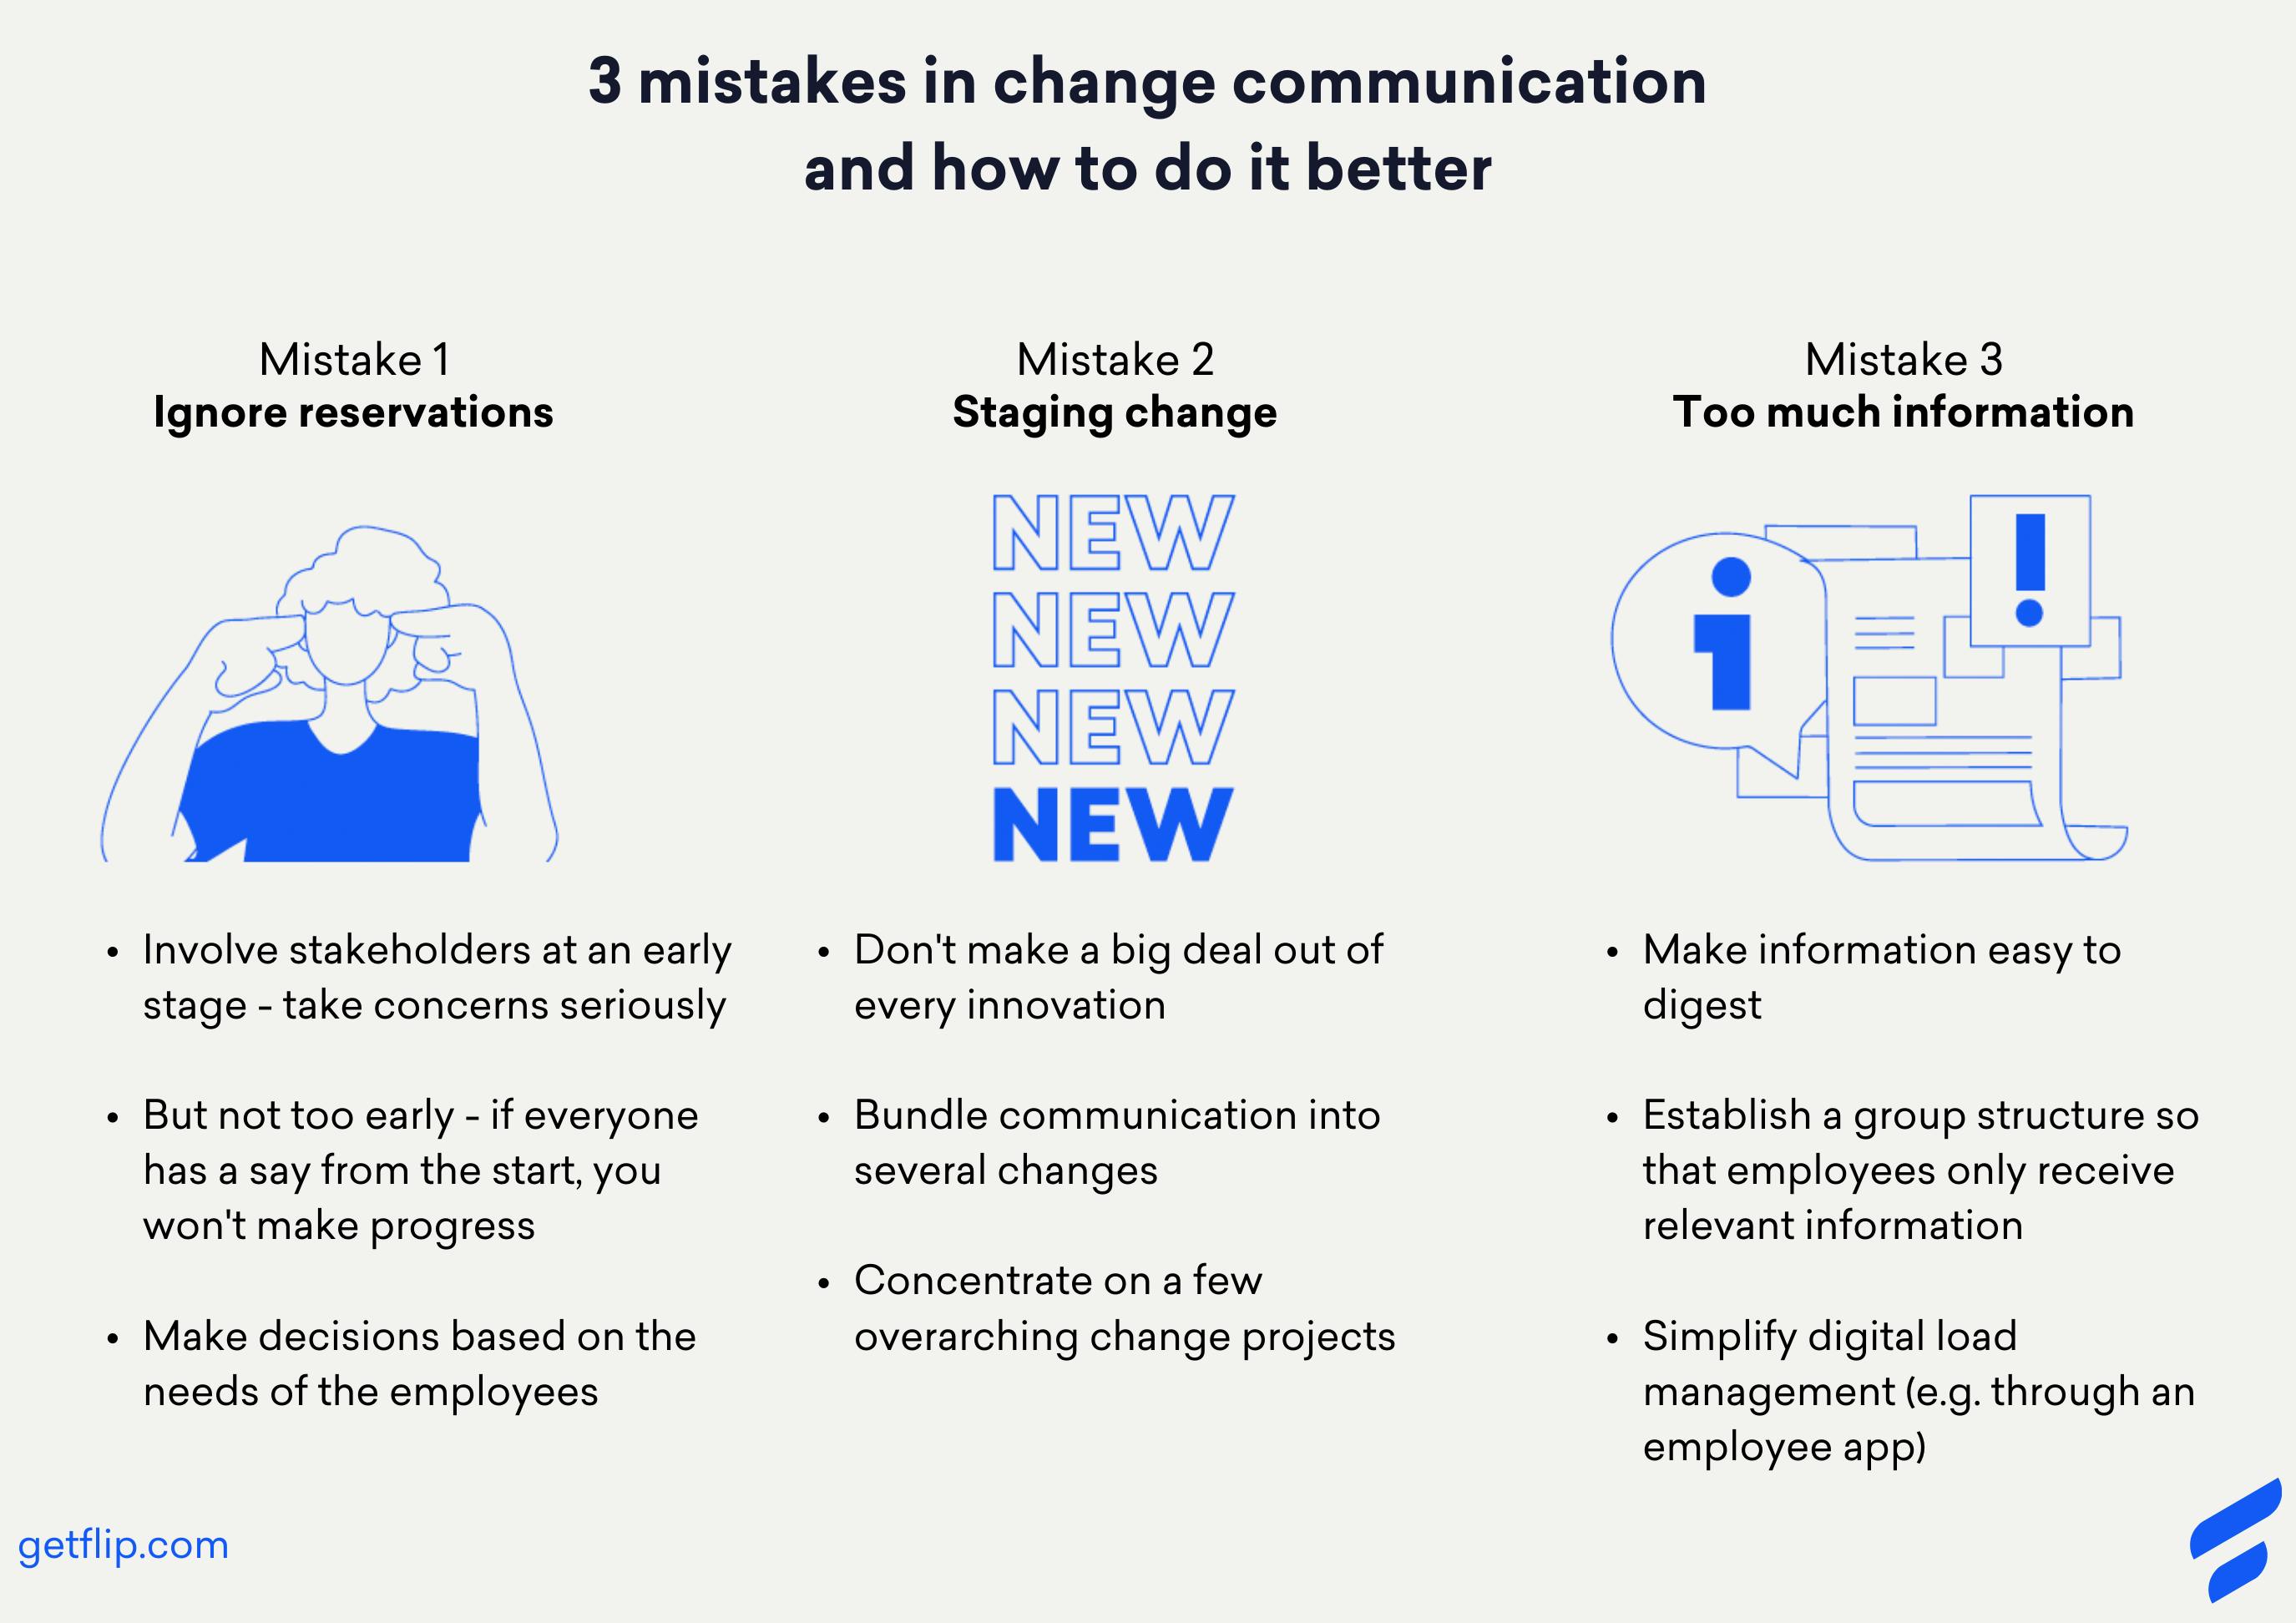 3 Mistakes in change communication and how to do it better with graphics